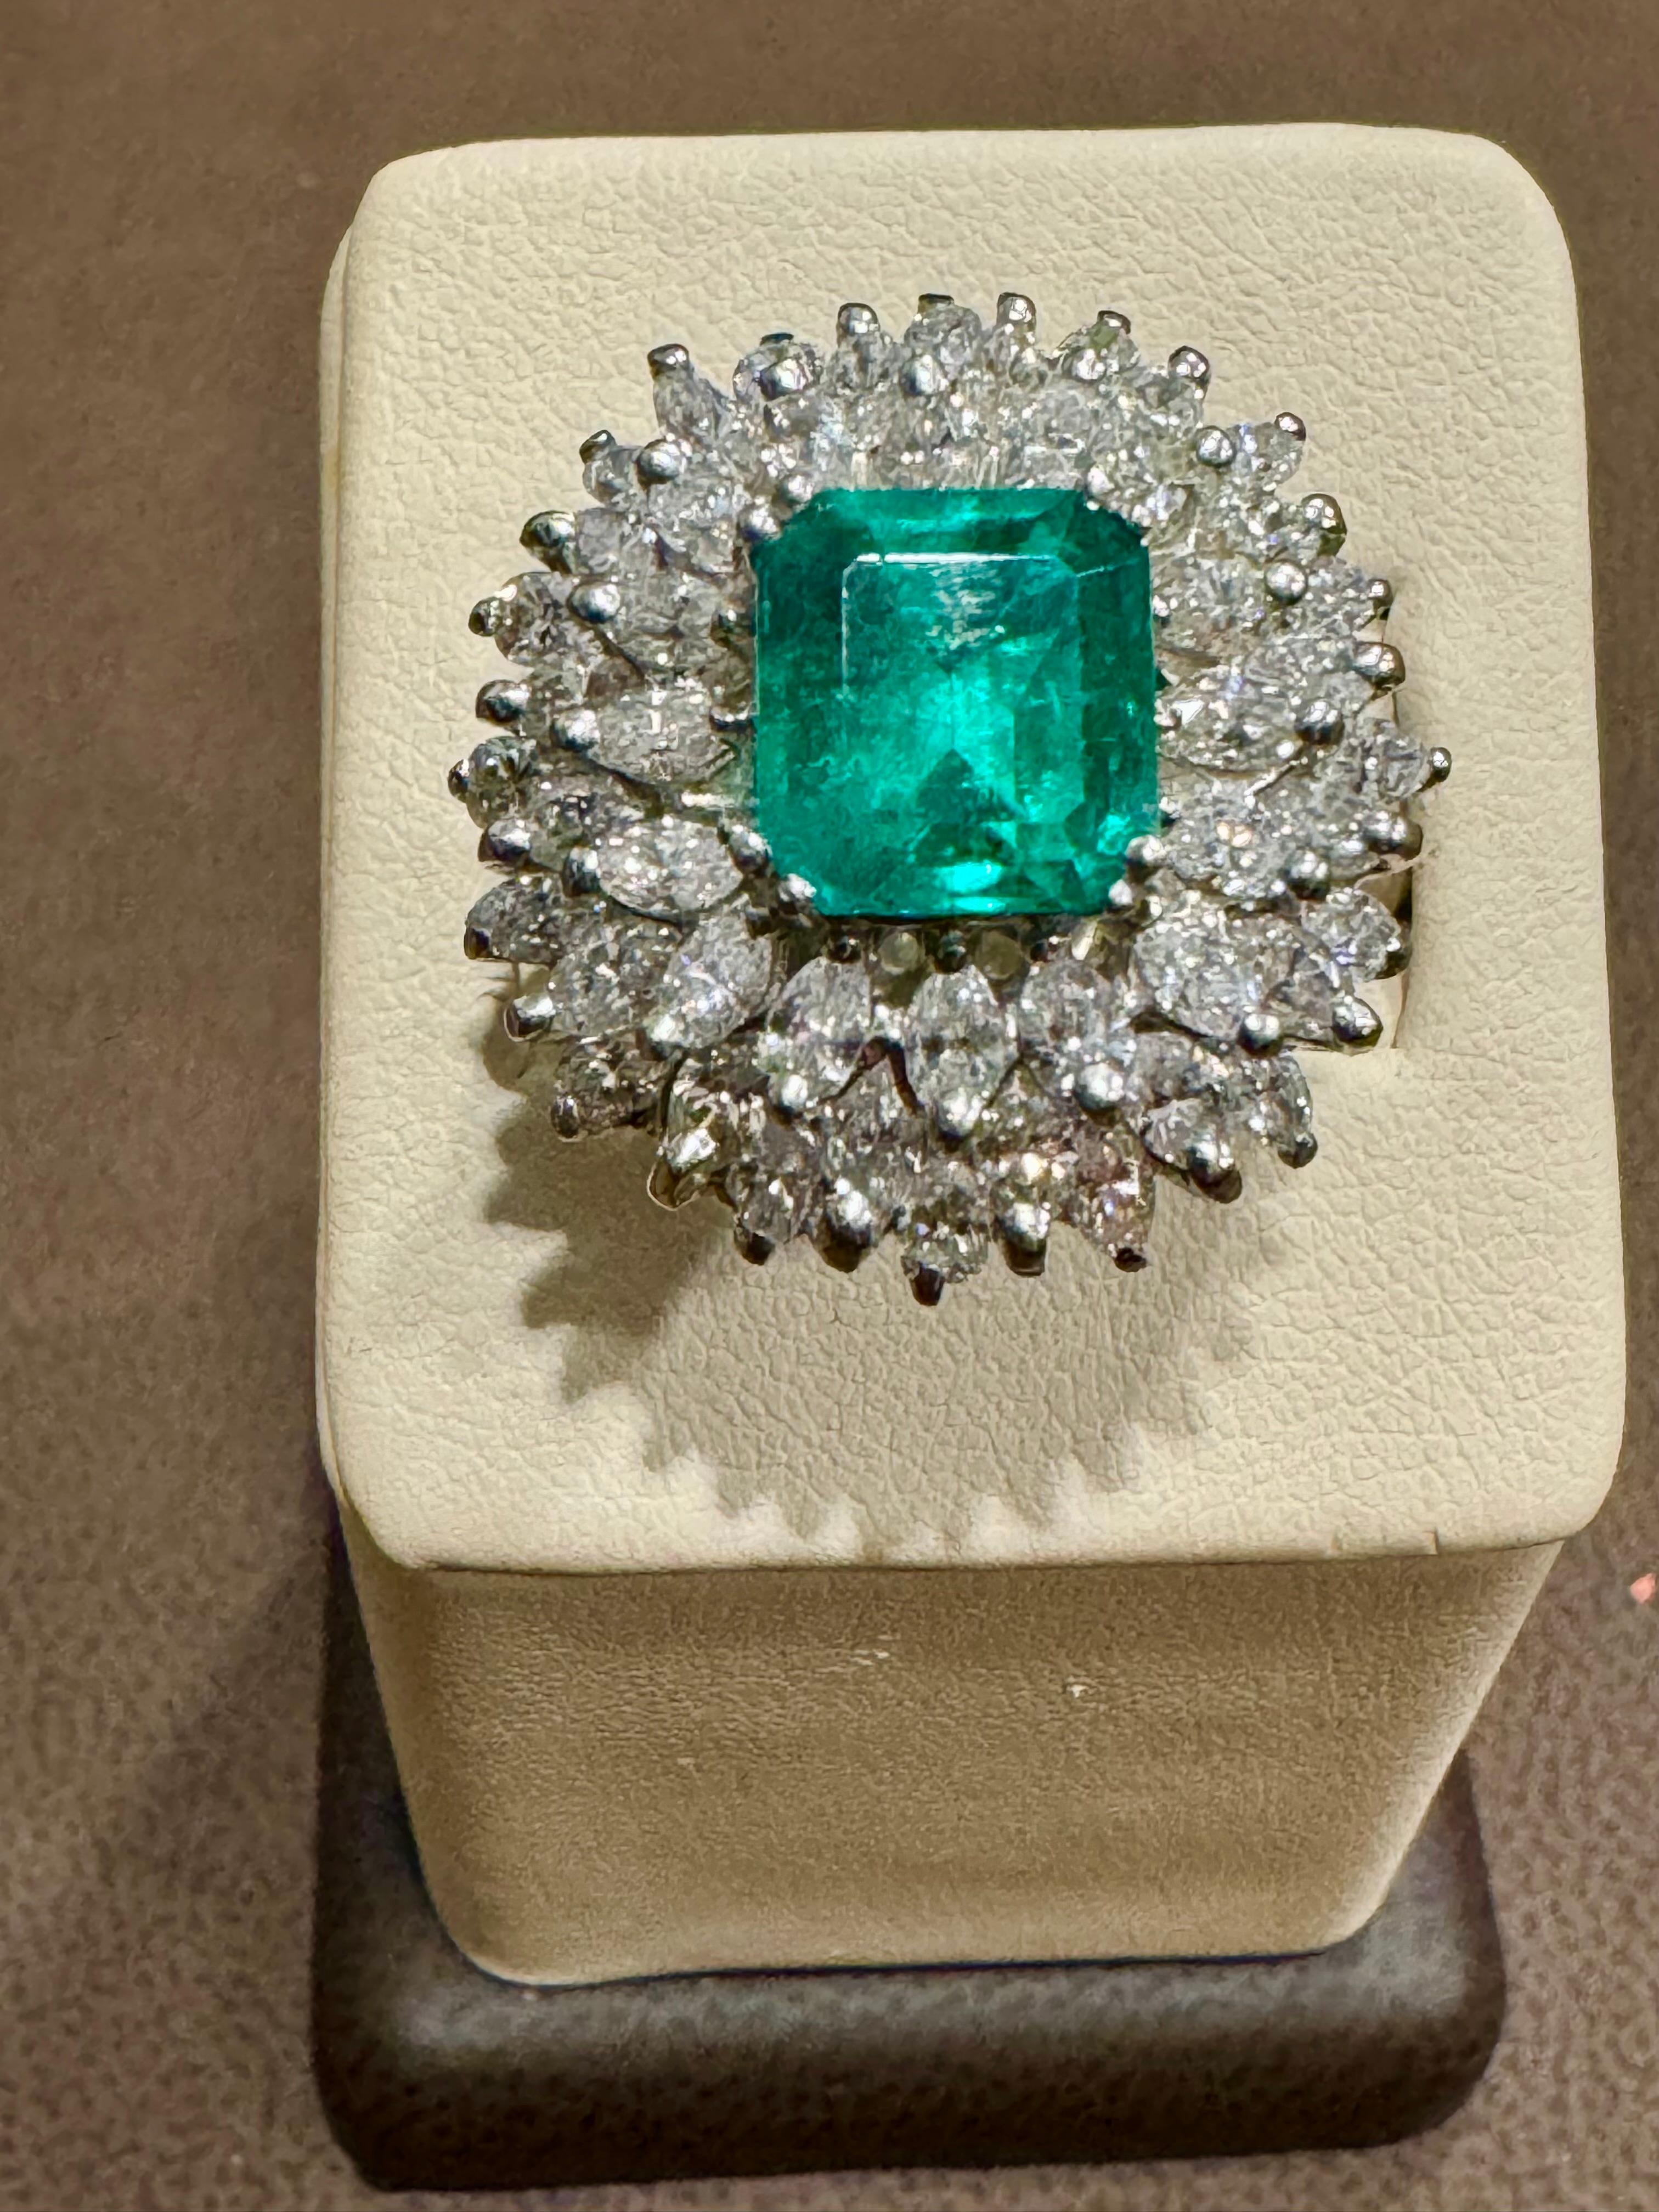 4 Carat Emerald Cut Colombian Emerald & 5.5 Ct Diamond Ring in Platinum Size 6 In Excellent Condition For Sale In New York, NY